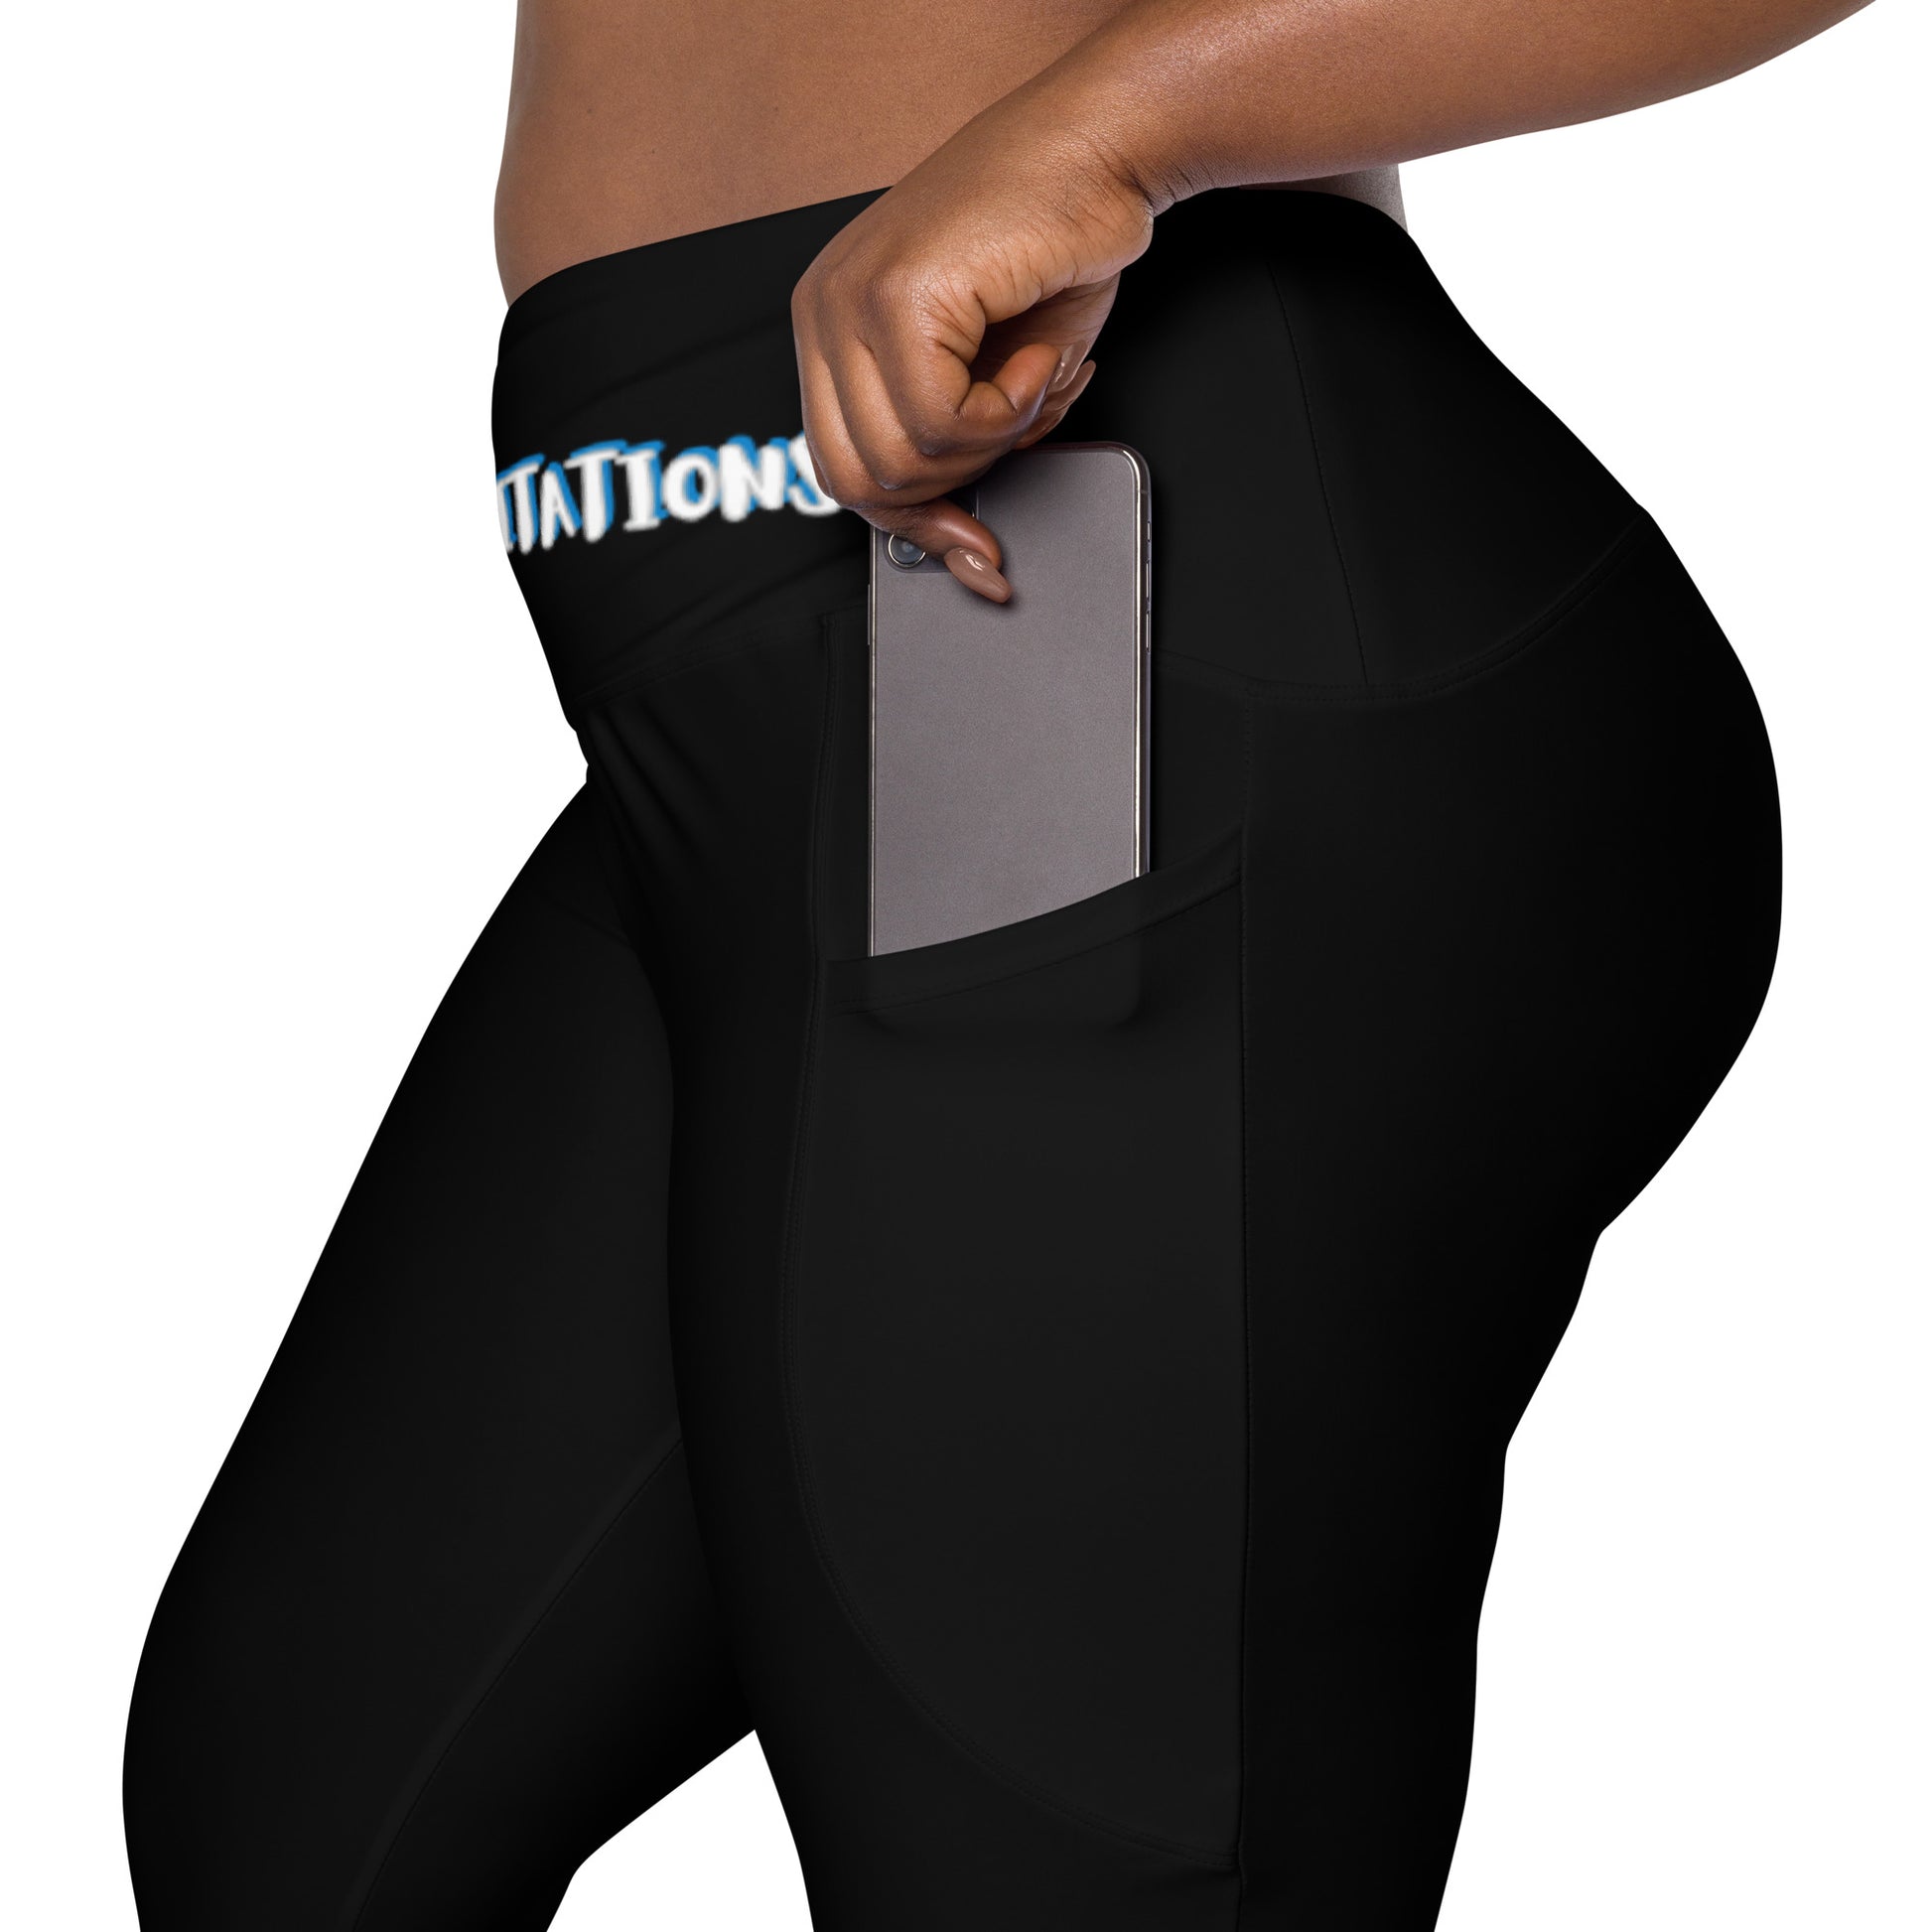 " Shatter Your Limitations" Leggings with pockets - Apply Pressure Fitness